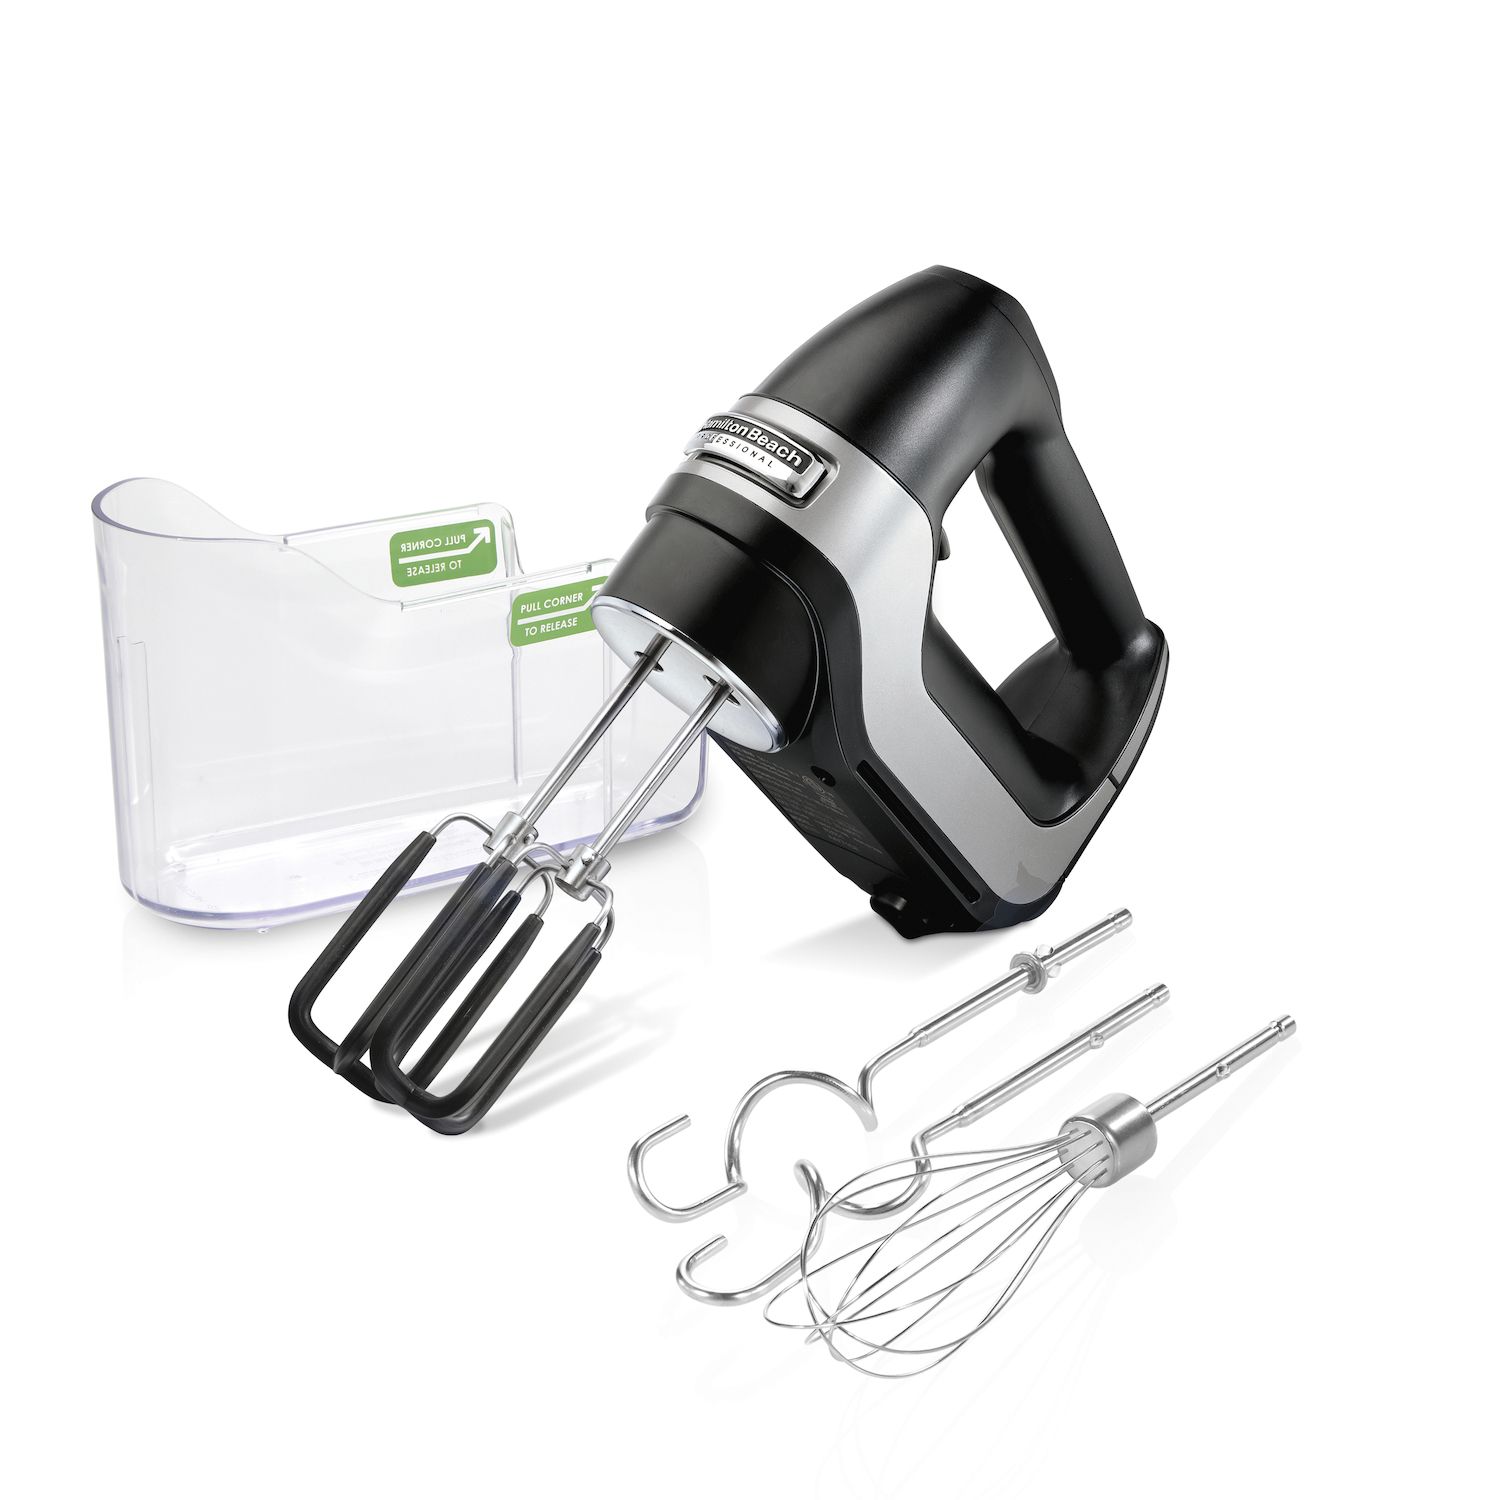 Hamilton Beach Power Deluxe 6-Speed Electric Hand Mixer with